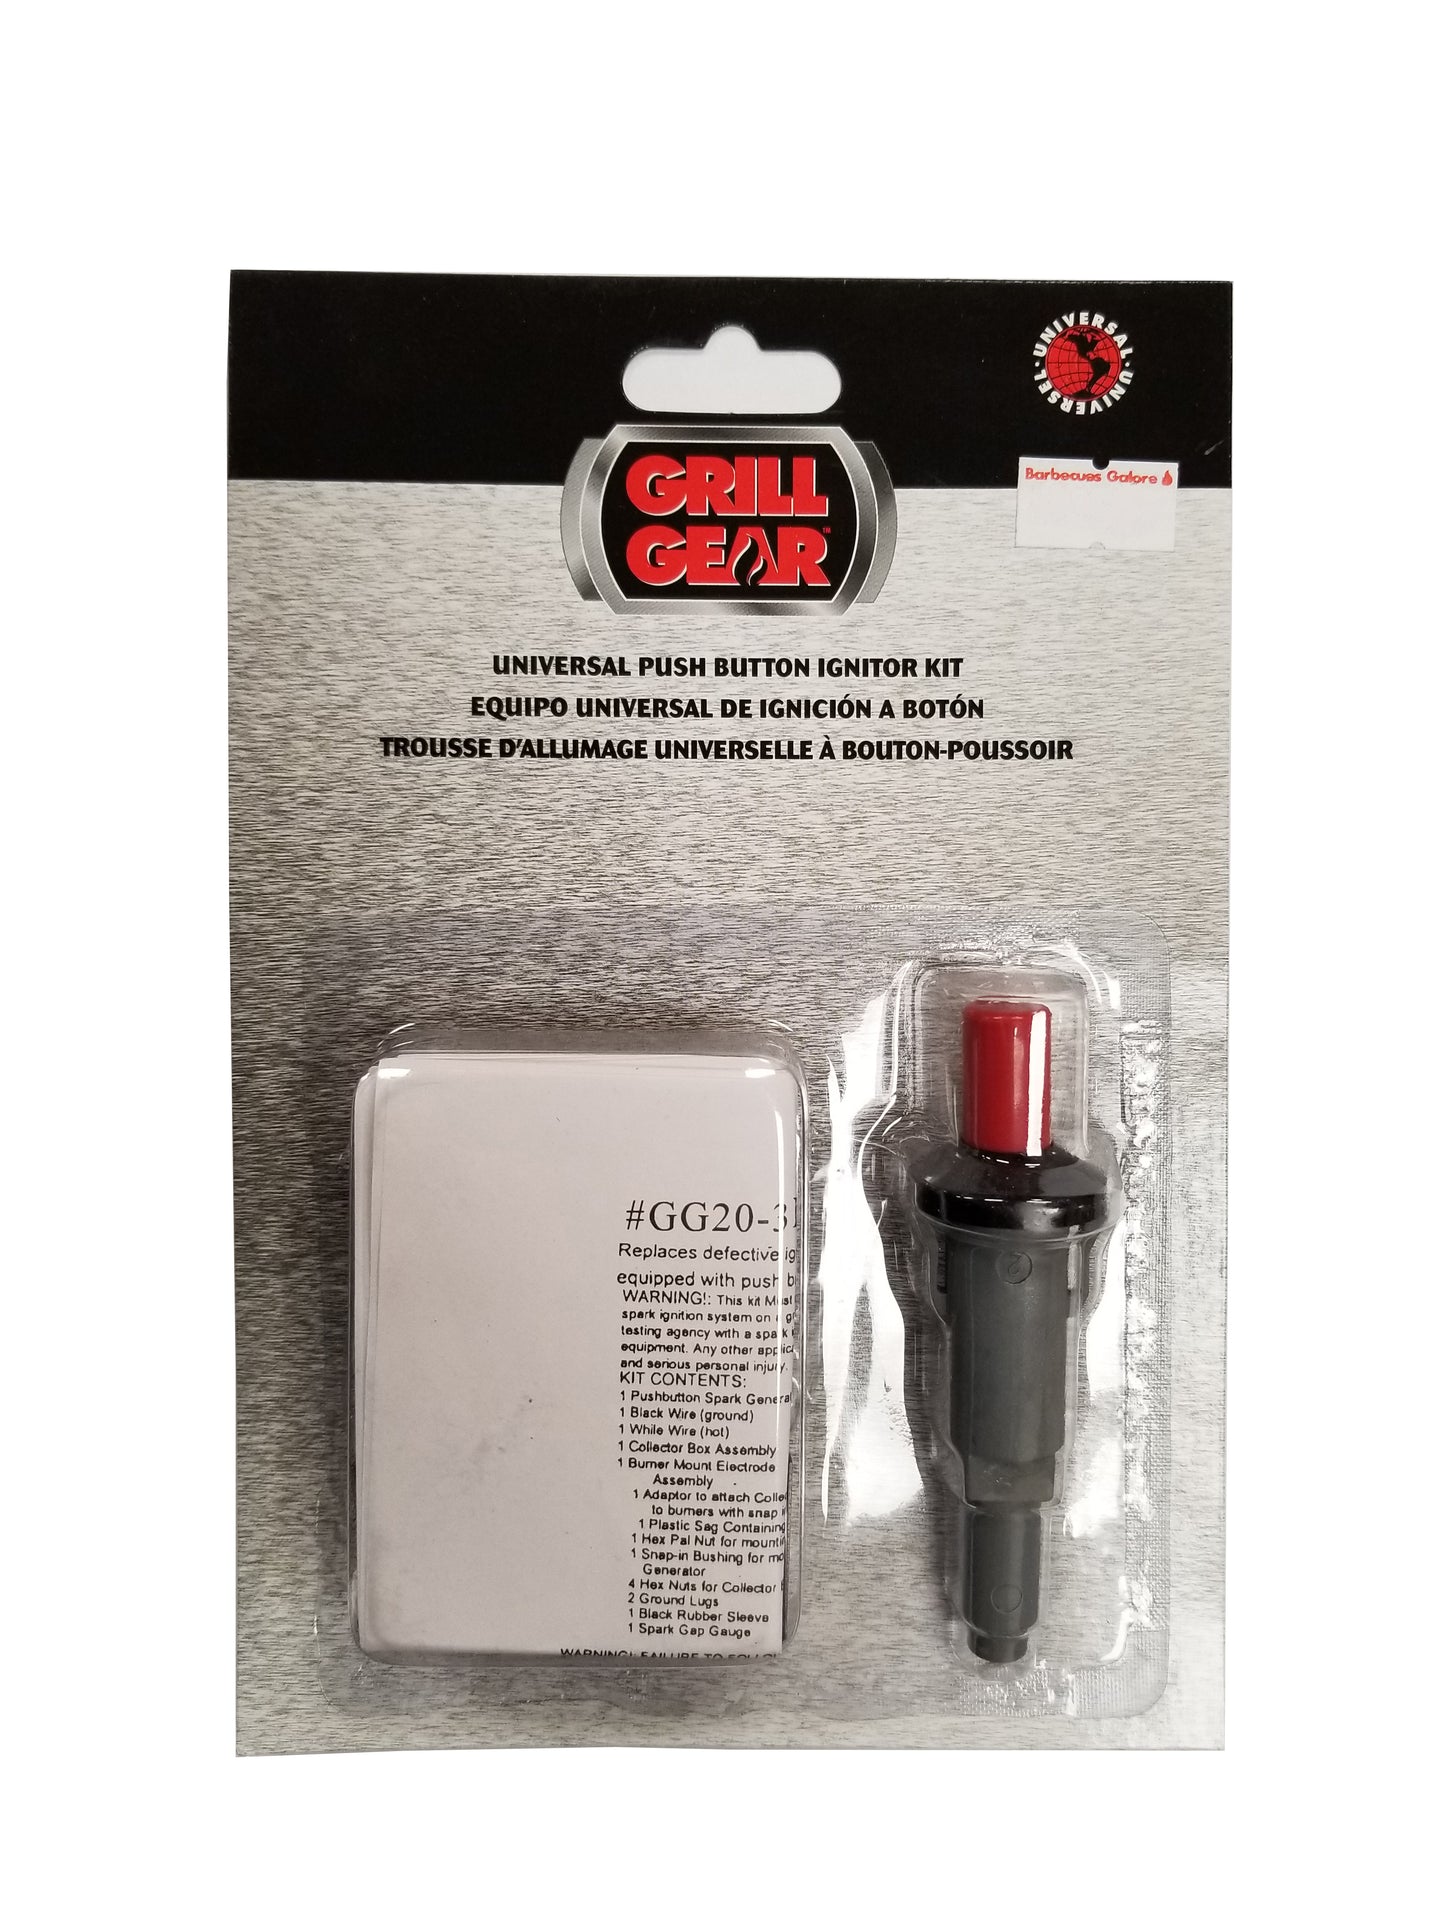 Universal Push Button Ignitor Kit | Barbecues Galore